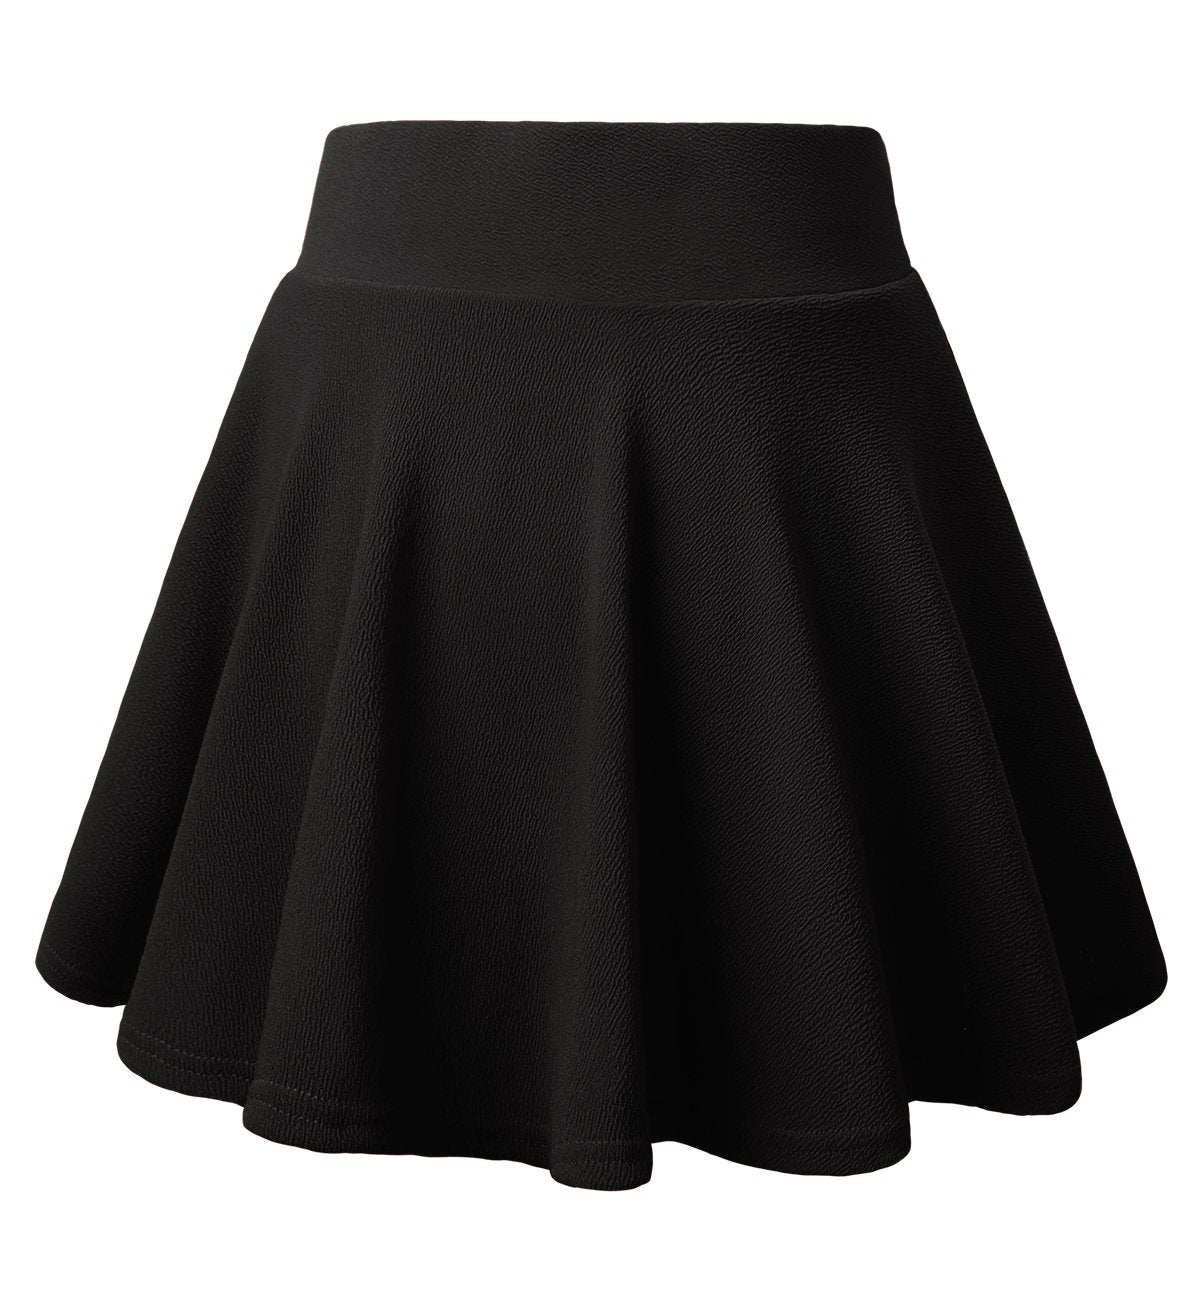 DJT Flared Pleated Women's Casual Stretchy Black Mini Skater Skirt with Shorts